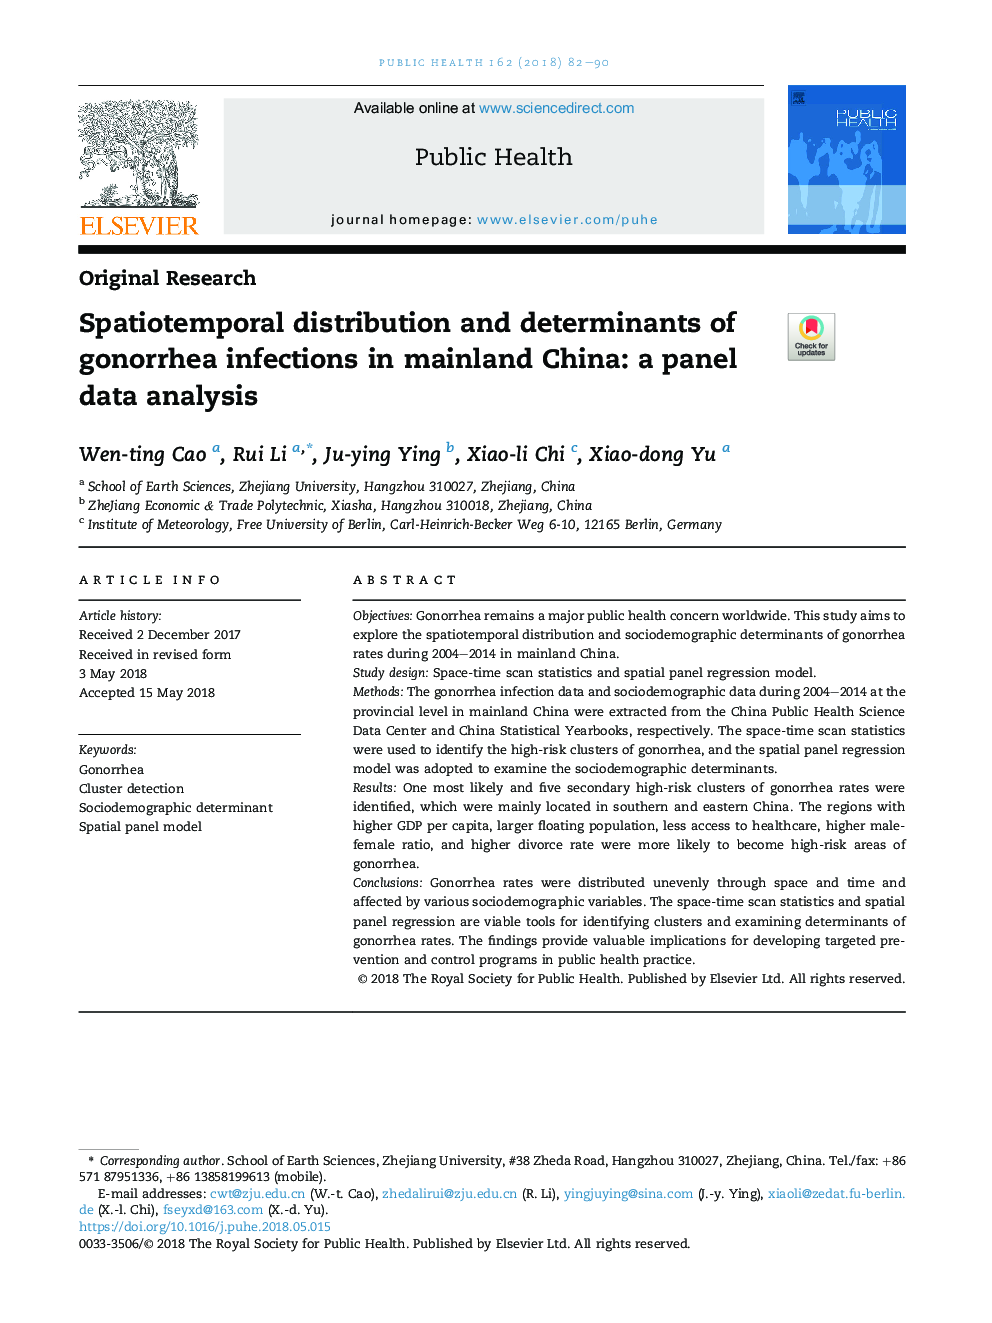 Spatiotemporal distribution and determinants of gonorrhea infections in mainland China: a panel data analysis